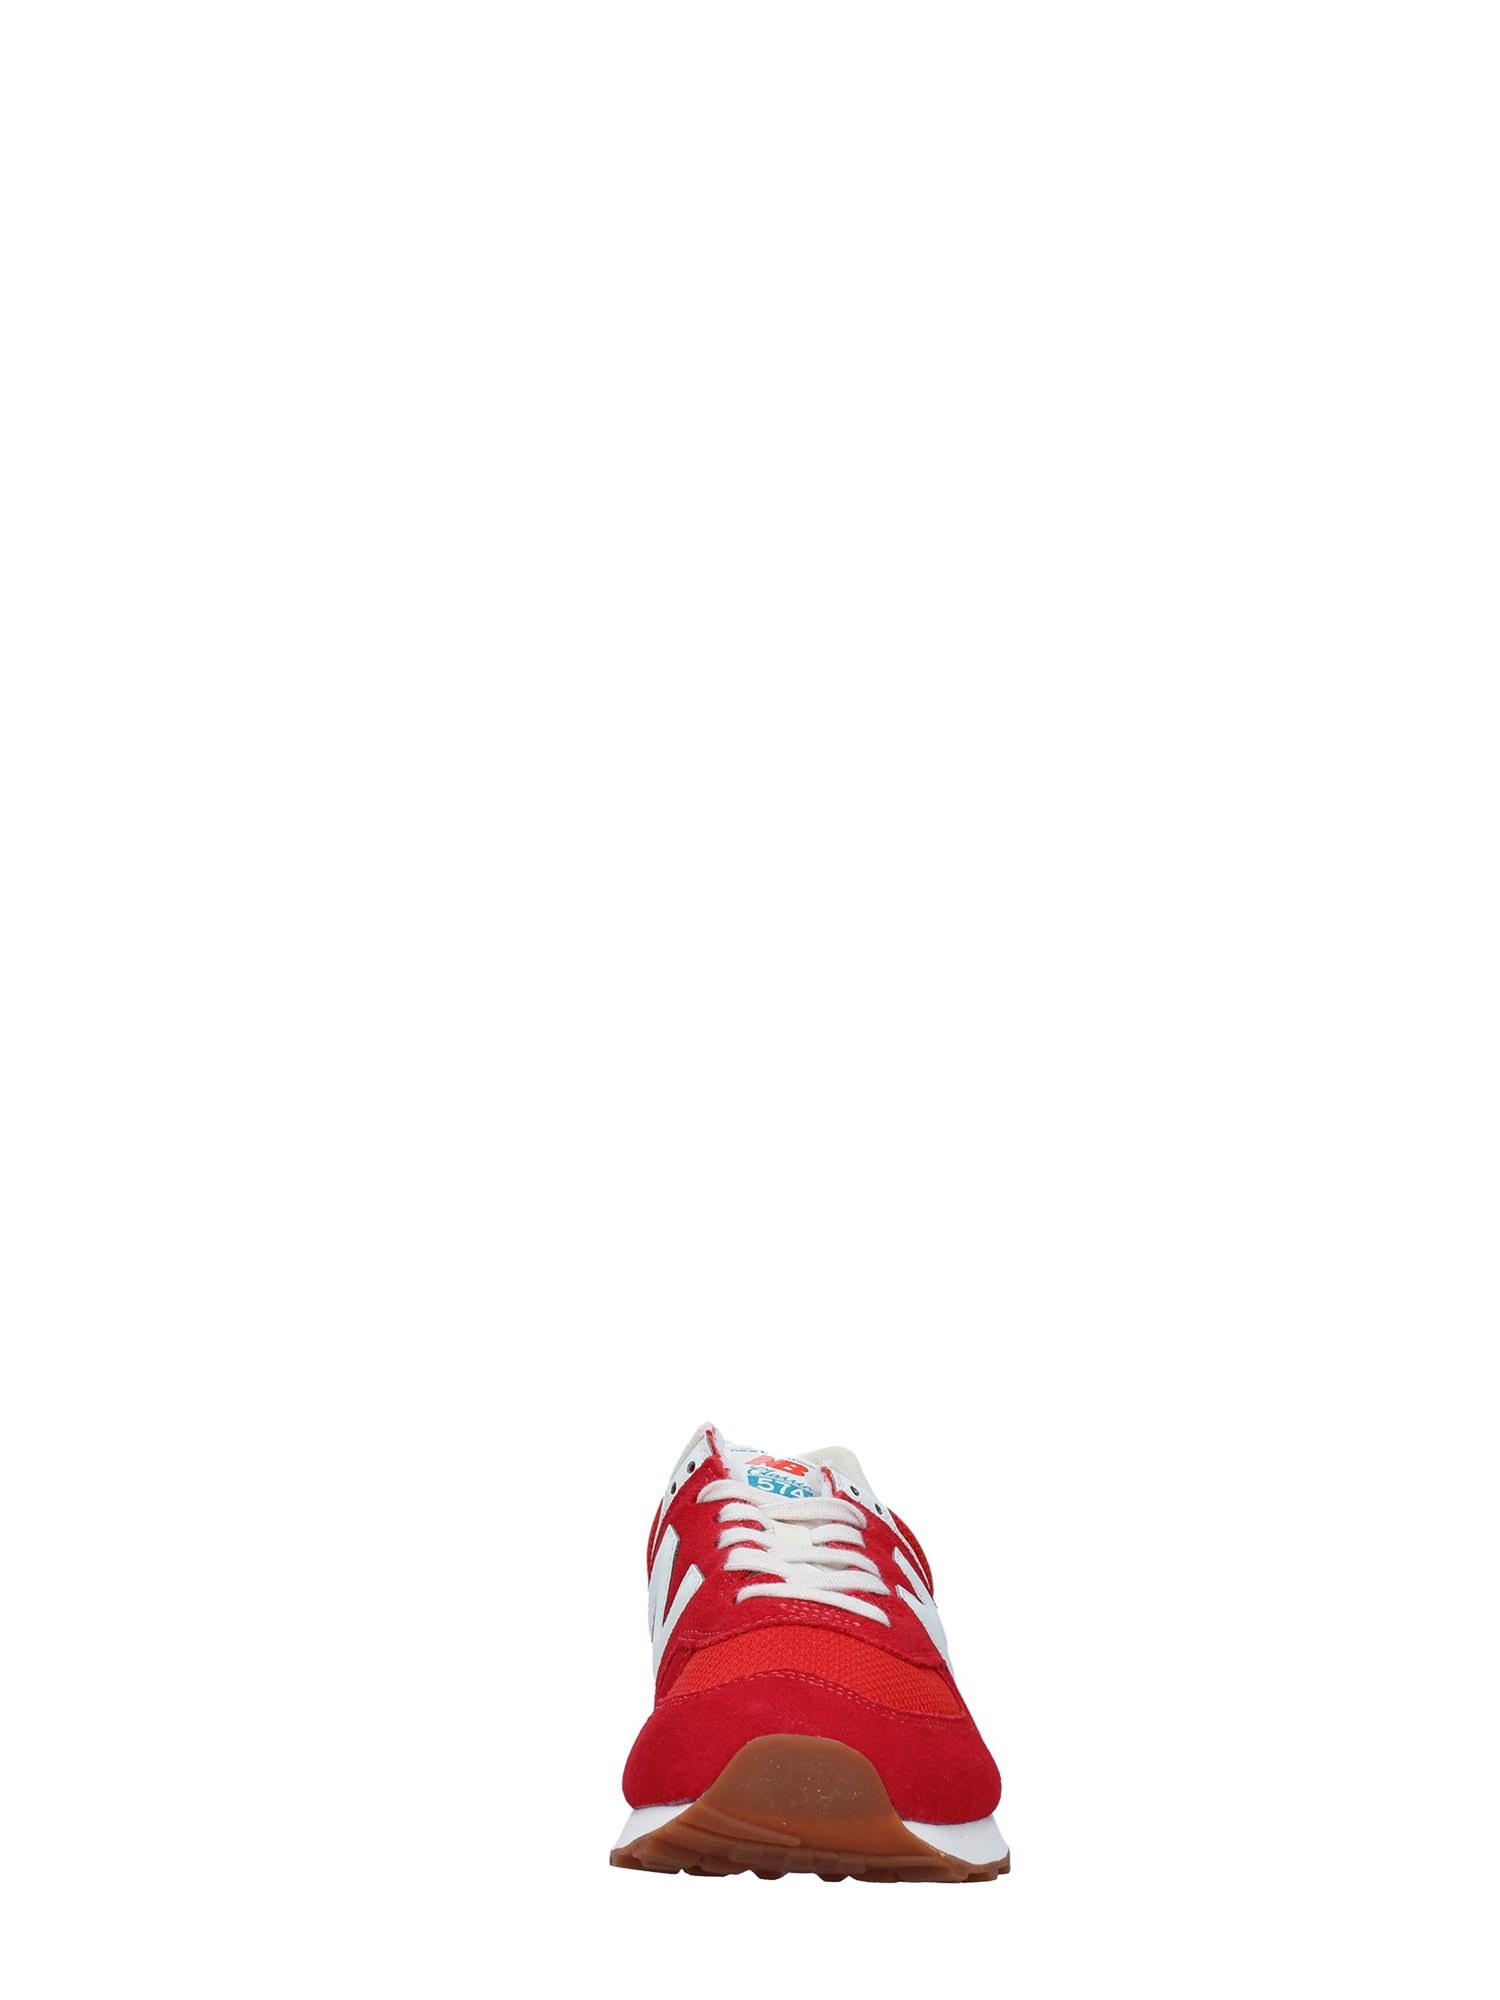 NEW BALANCE SNEAKERS 574 ROSSO